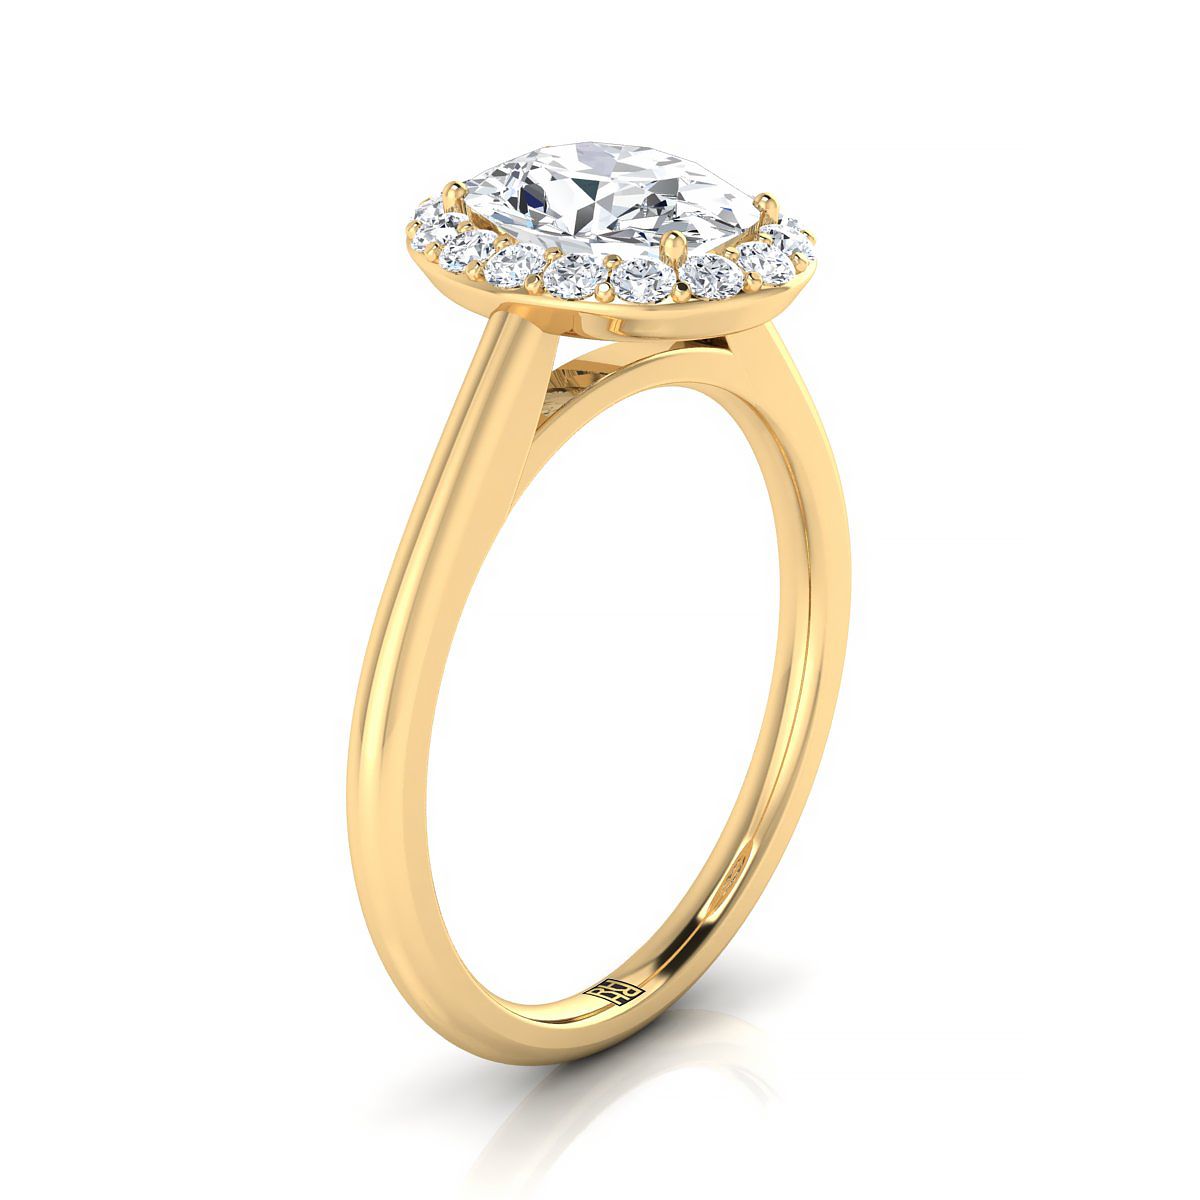 18K Yellow Gold Oval Diamond Shared Prong Halo Engagement Ring -1/5ctw